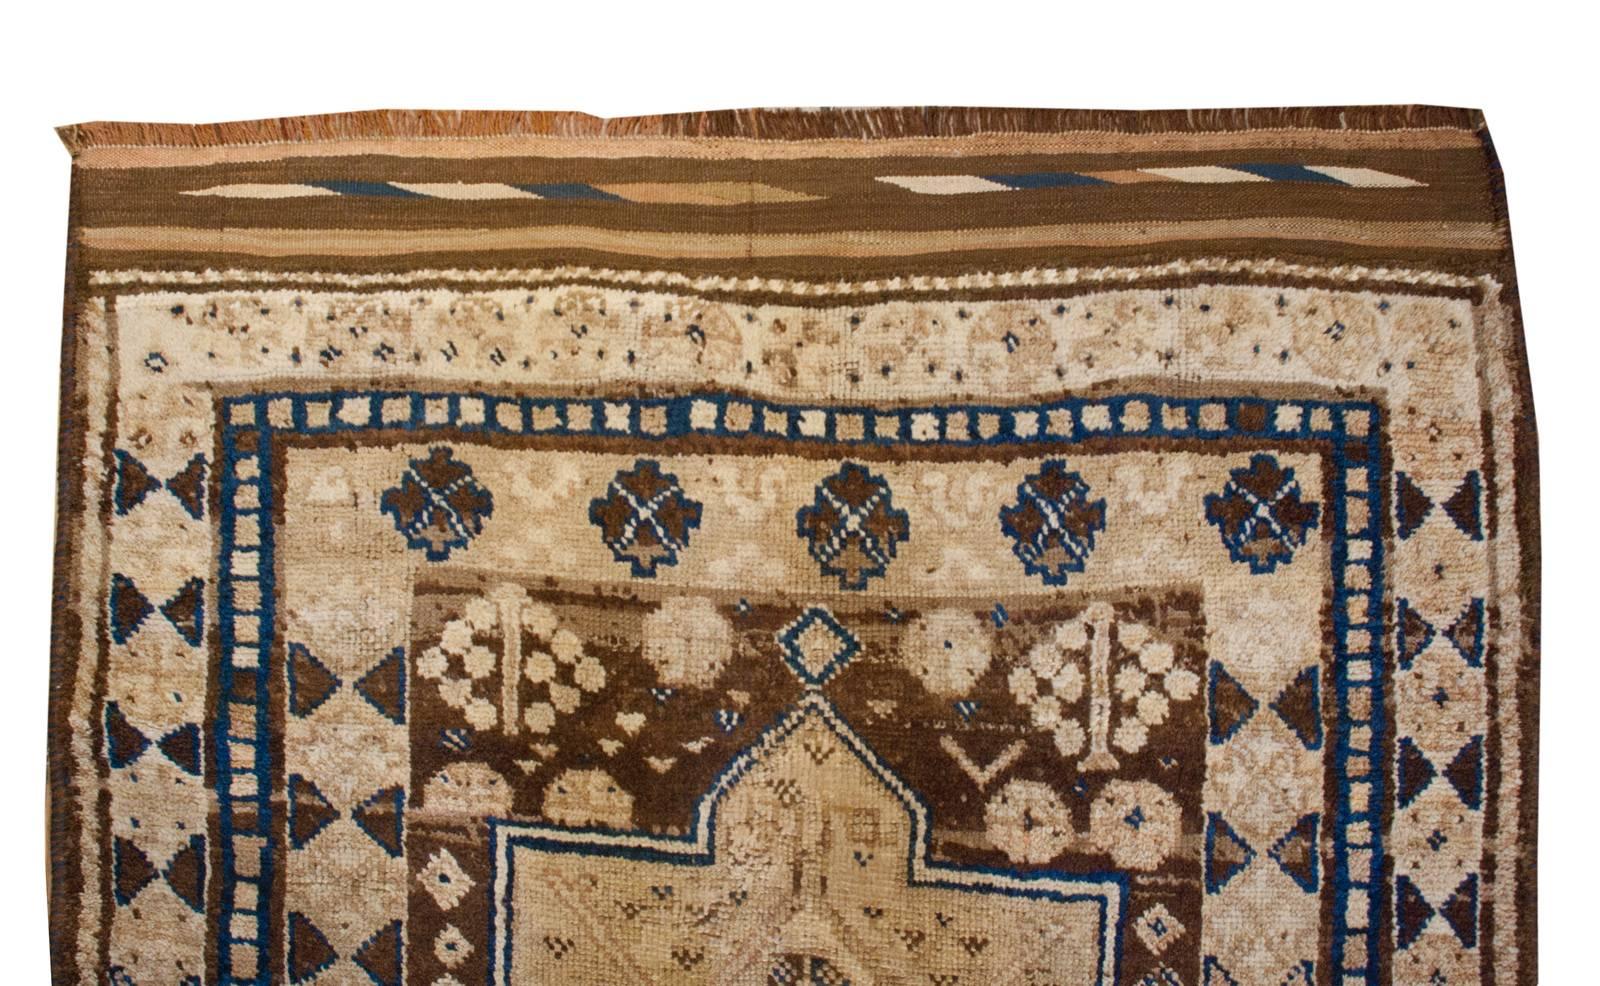 An incredible early 20th century Persian Gabbeh rug woven in undyed natural brown and beige wool accented with a few indigo dyed stripes. The two bold geometric medallions, each with a diamond motif in the center, are surrounded by a field of